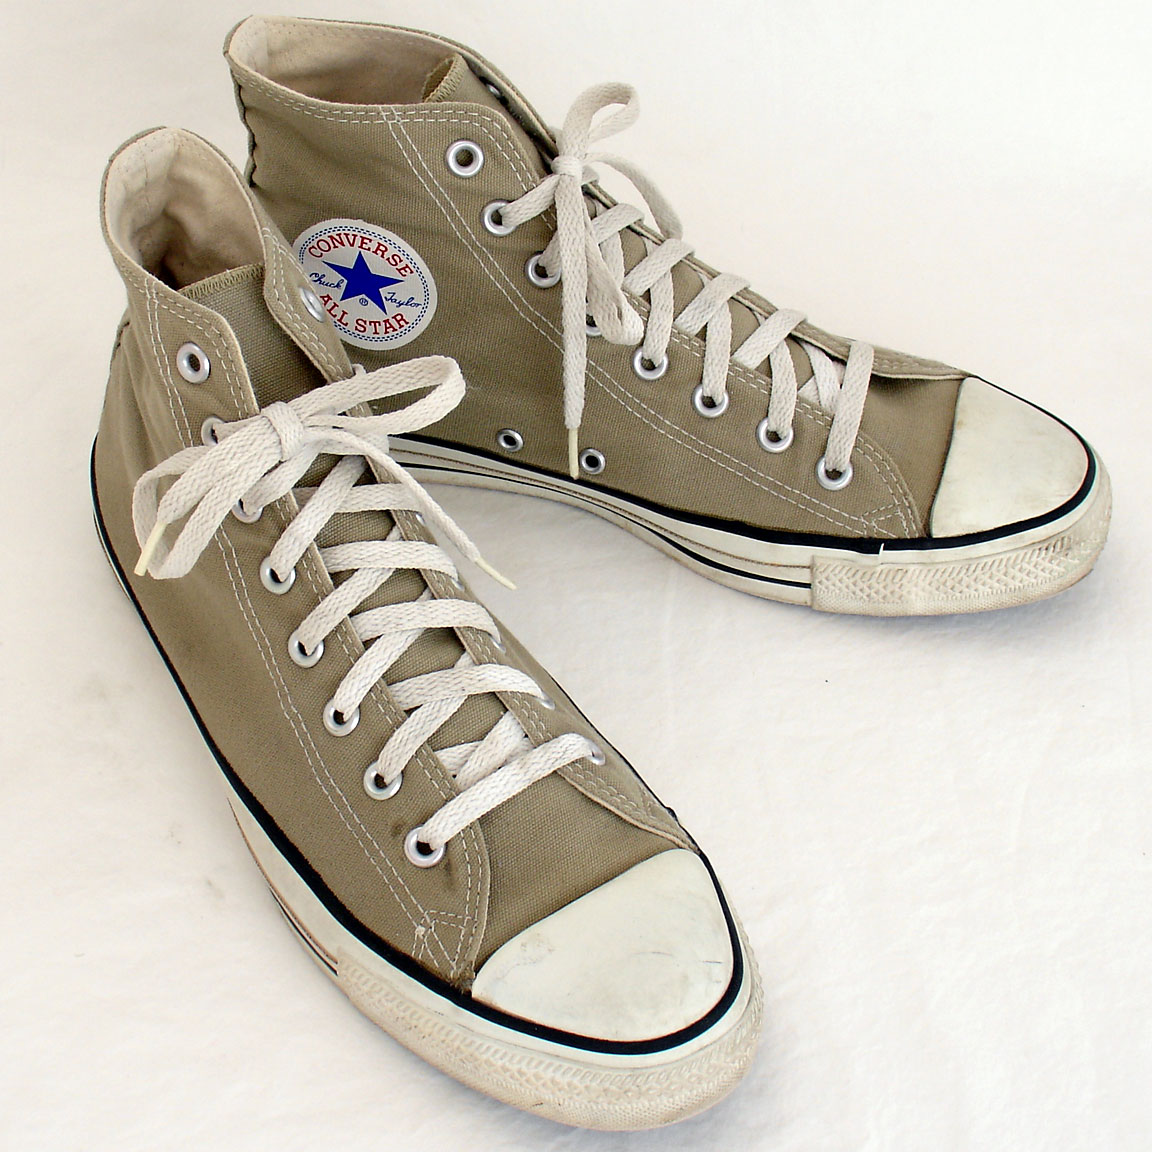 Vintage American-made Converse All Star Chuck Taylor khaki shoes for sale at http://www.collectornet.net/shoes